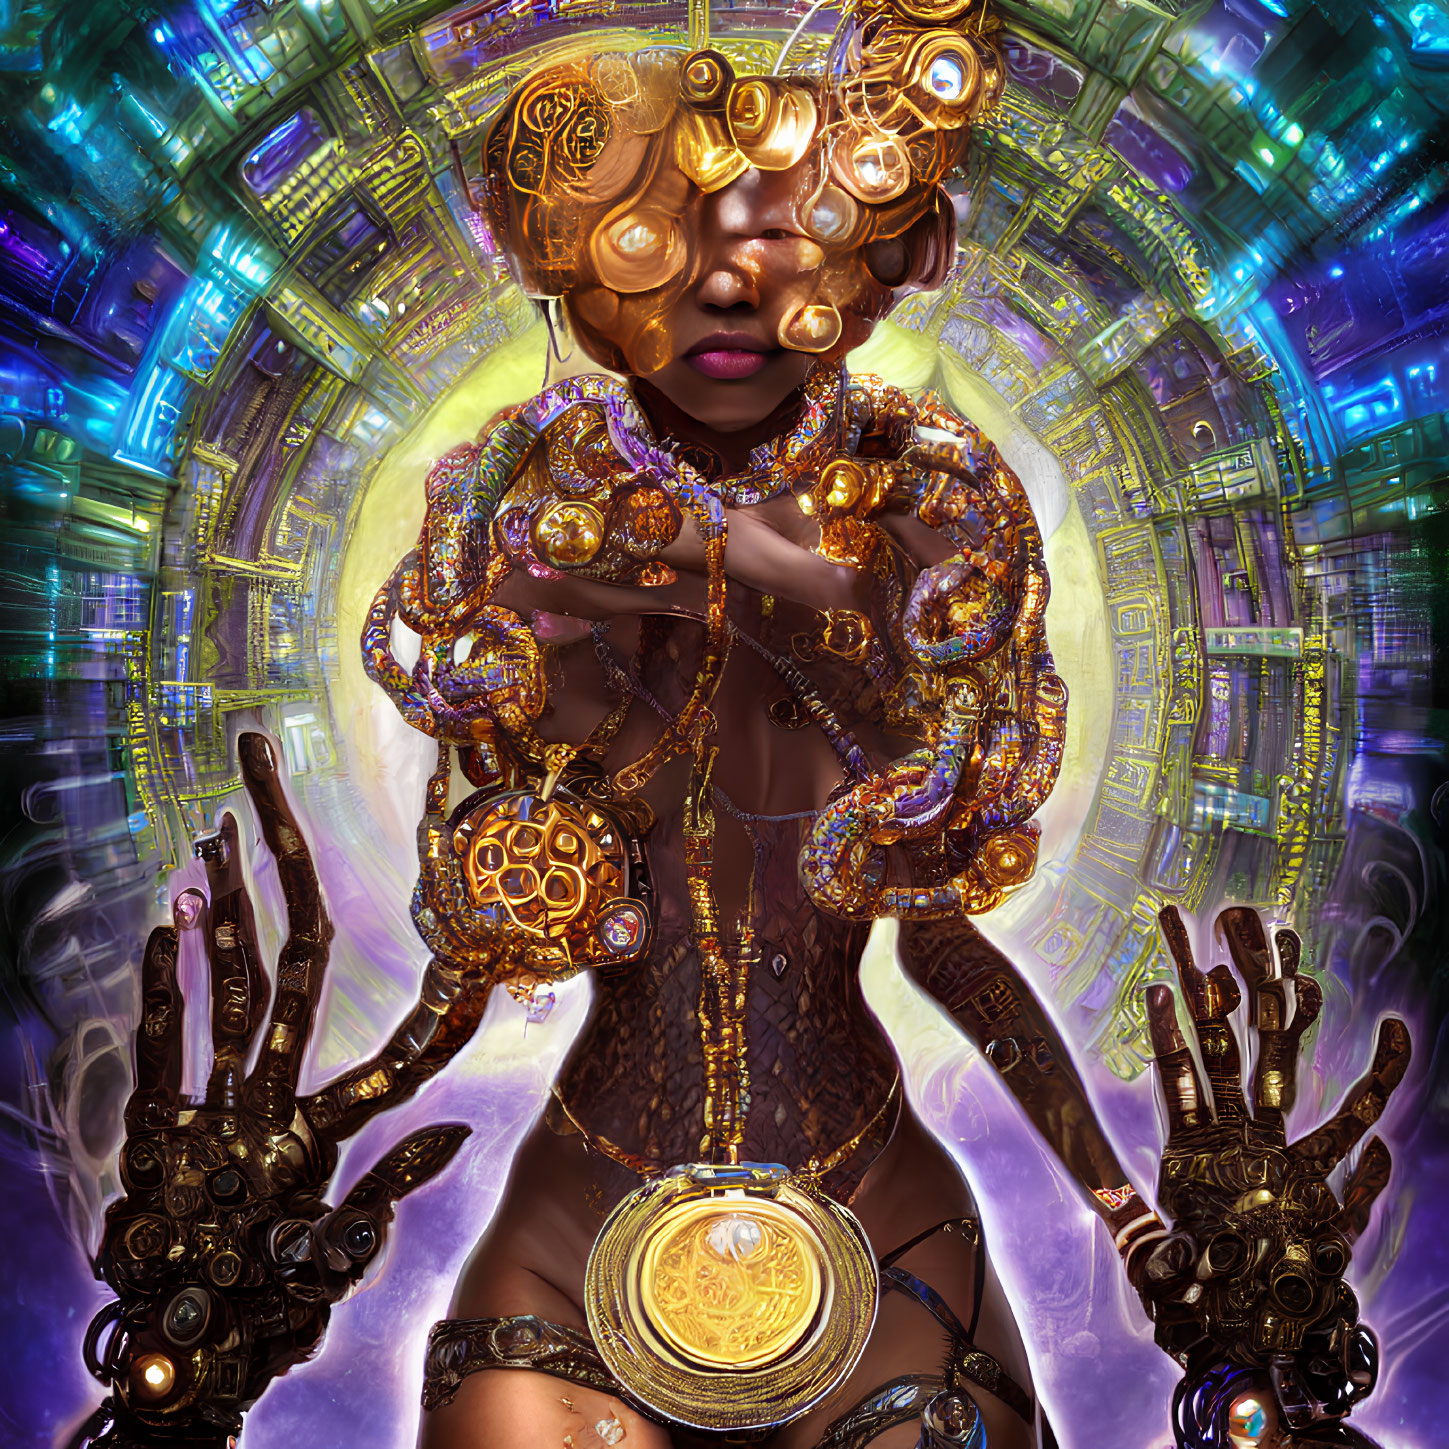 Futuristic woman with gold jewelry and mechanical gloves in cybernetic setting